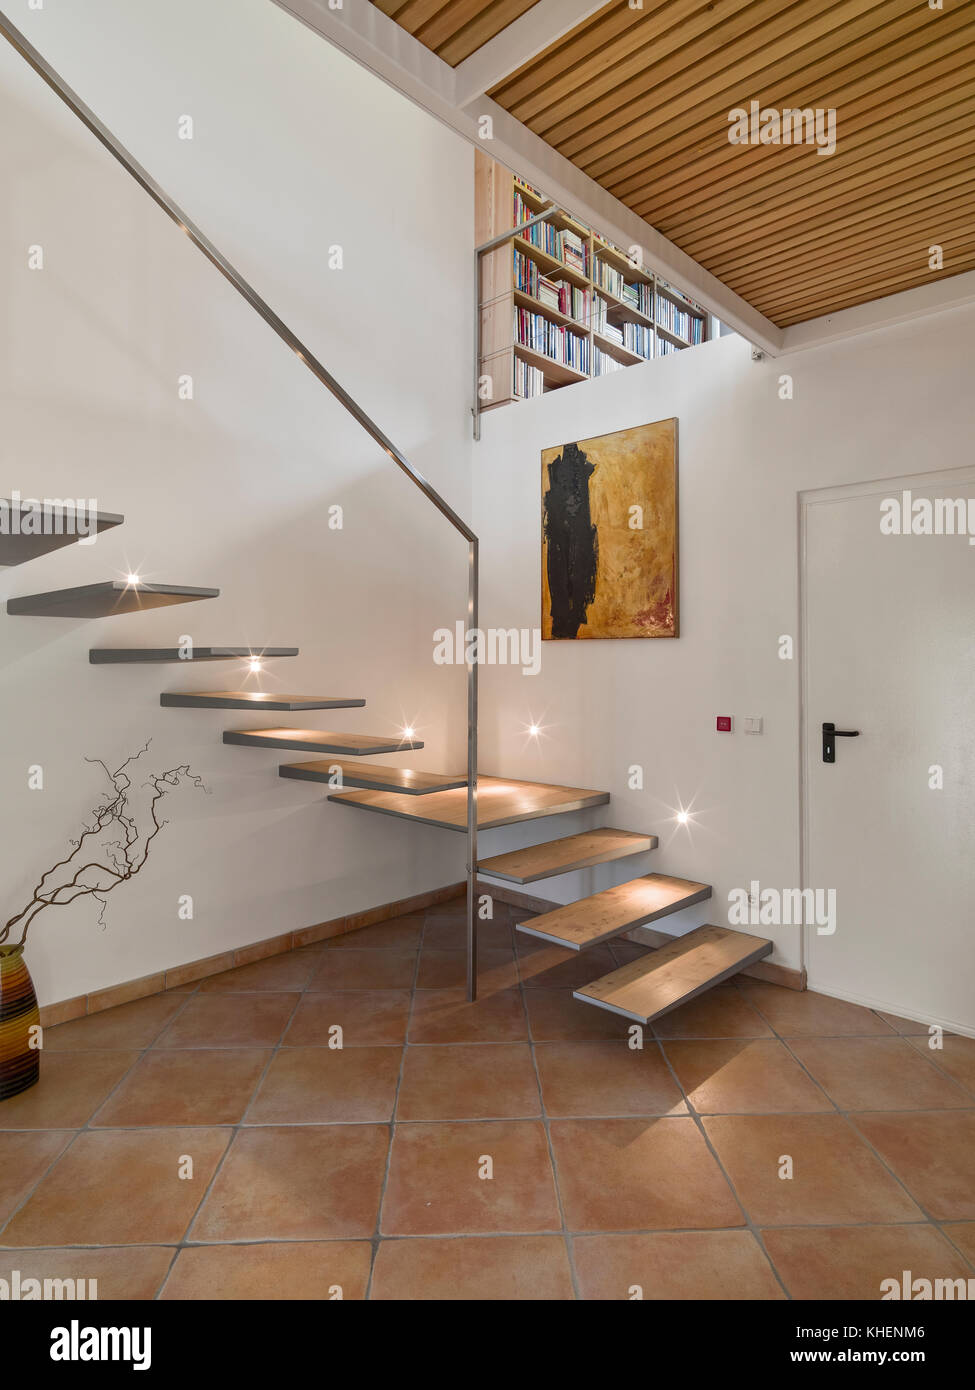 interiors shots of a modern entrance of a loft in the foreground the staircase the floor is made of wood Stock Photo